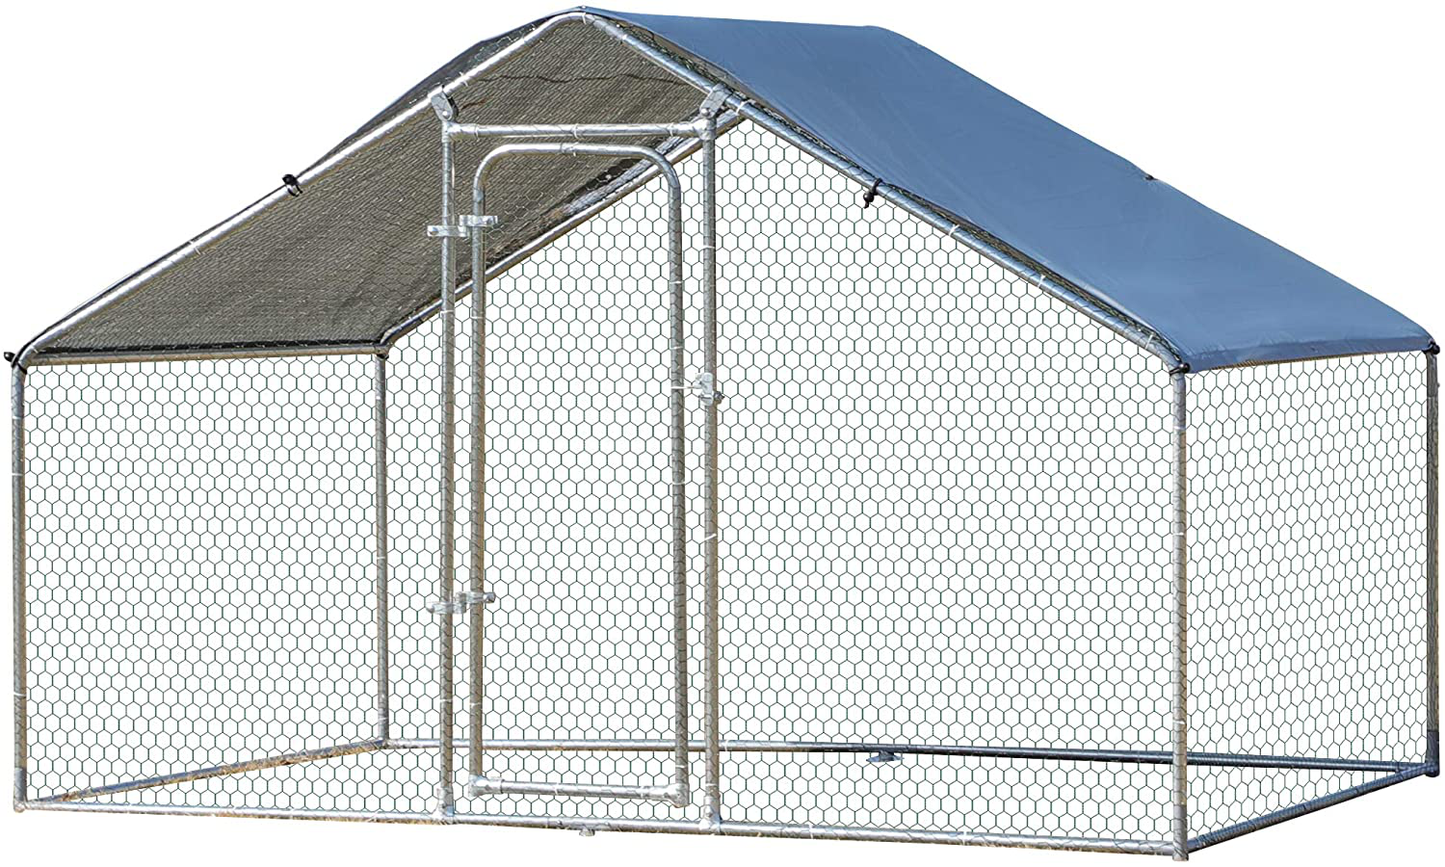 Pawhut Galvanized Large Metal Chicken Coop Cage Walk-In Enclosure Poultry Hen Run House Playpen Rabbit Hutch UV & Water Resistant Cover for Outdoor Backyard